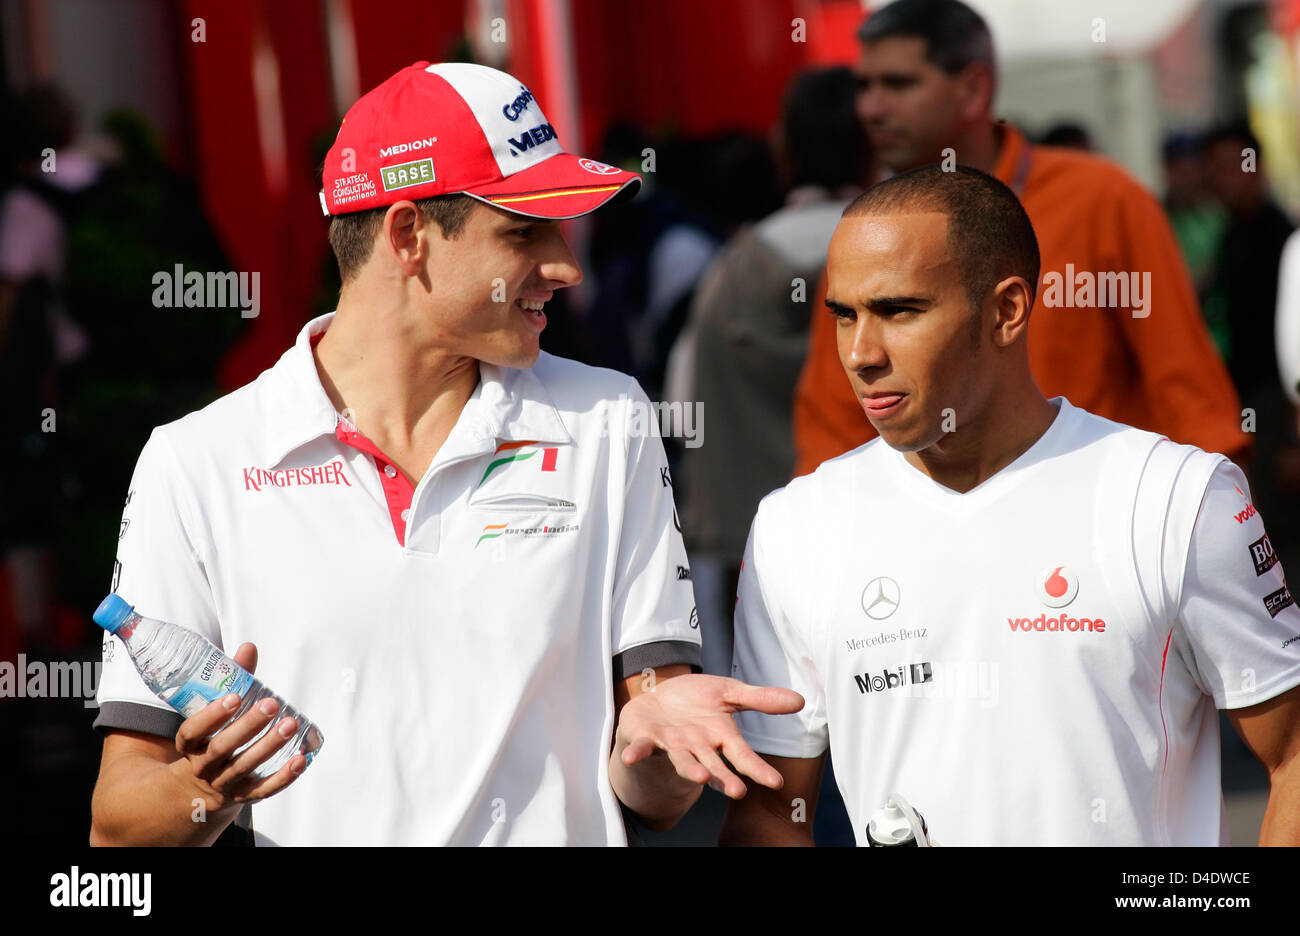 German Formula One driver Adrian Sutil of Force India (L) and British  Formula One driver Lewis Hamilton of McLaren Mercedes (R) walk through the  paddock of Circuit de Catalunya in Montmelo near